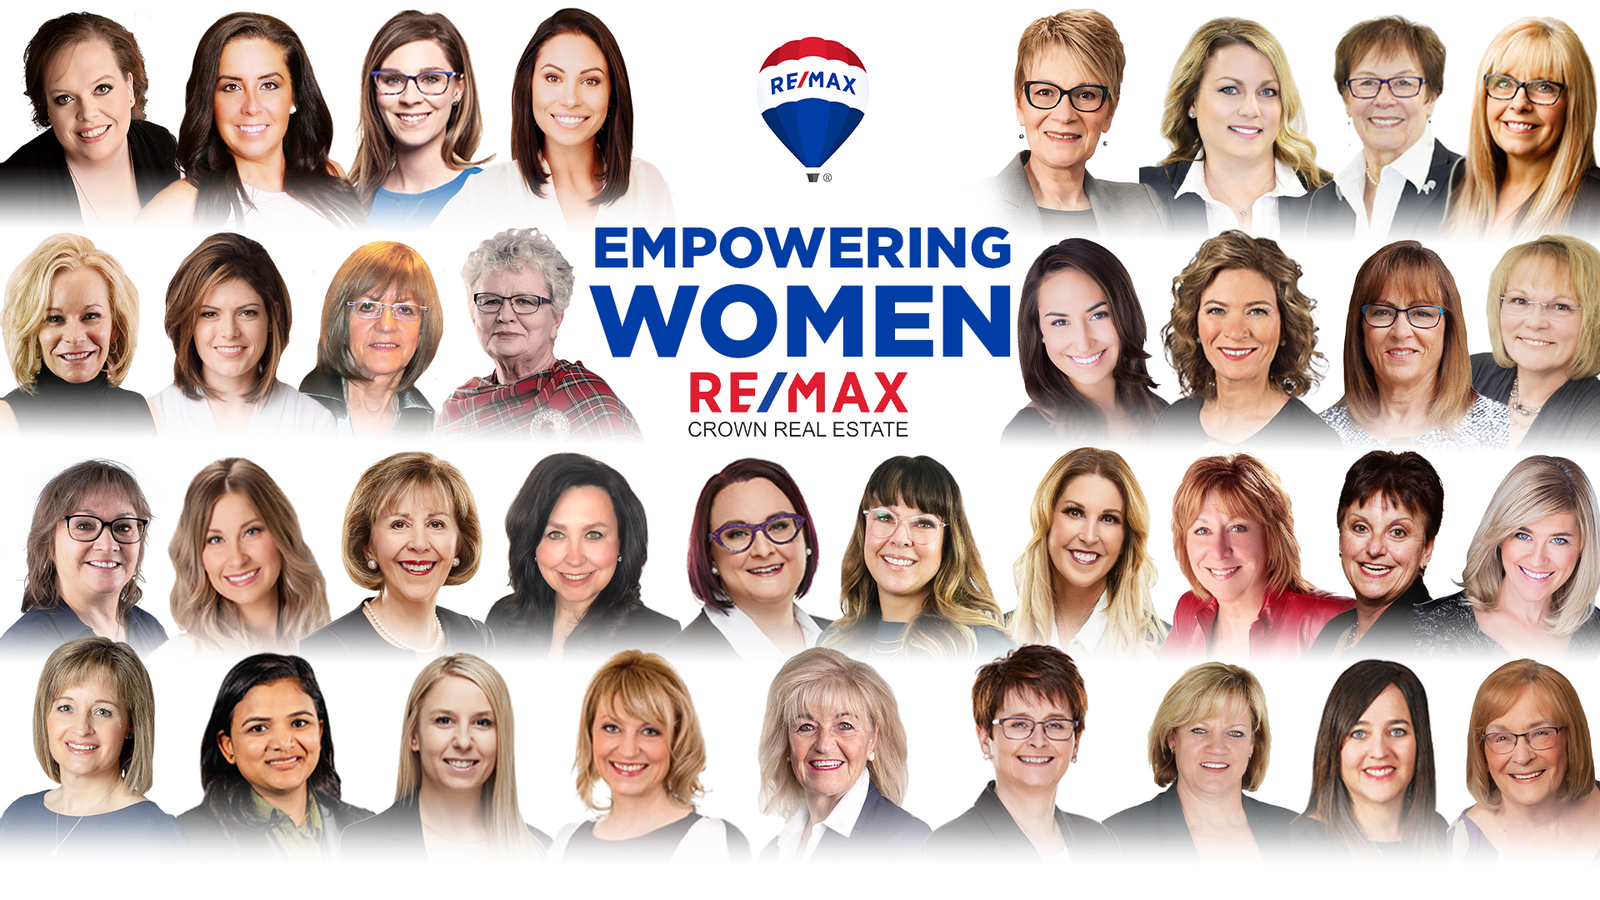 WHY RE/MAX IS A LEADING EMPLOYER FOR WOMEN